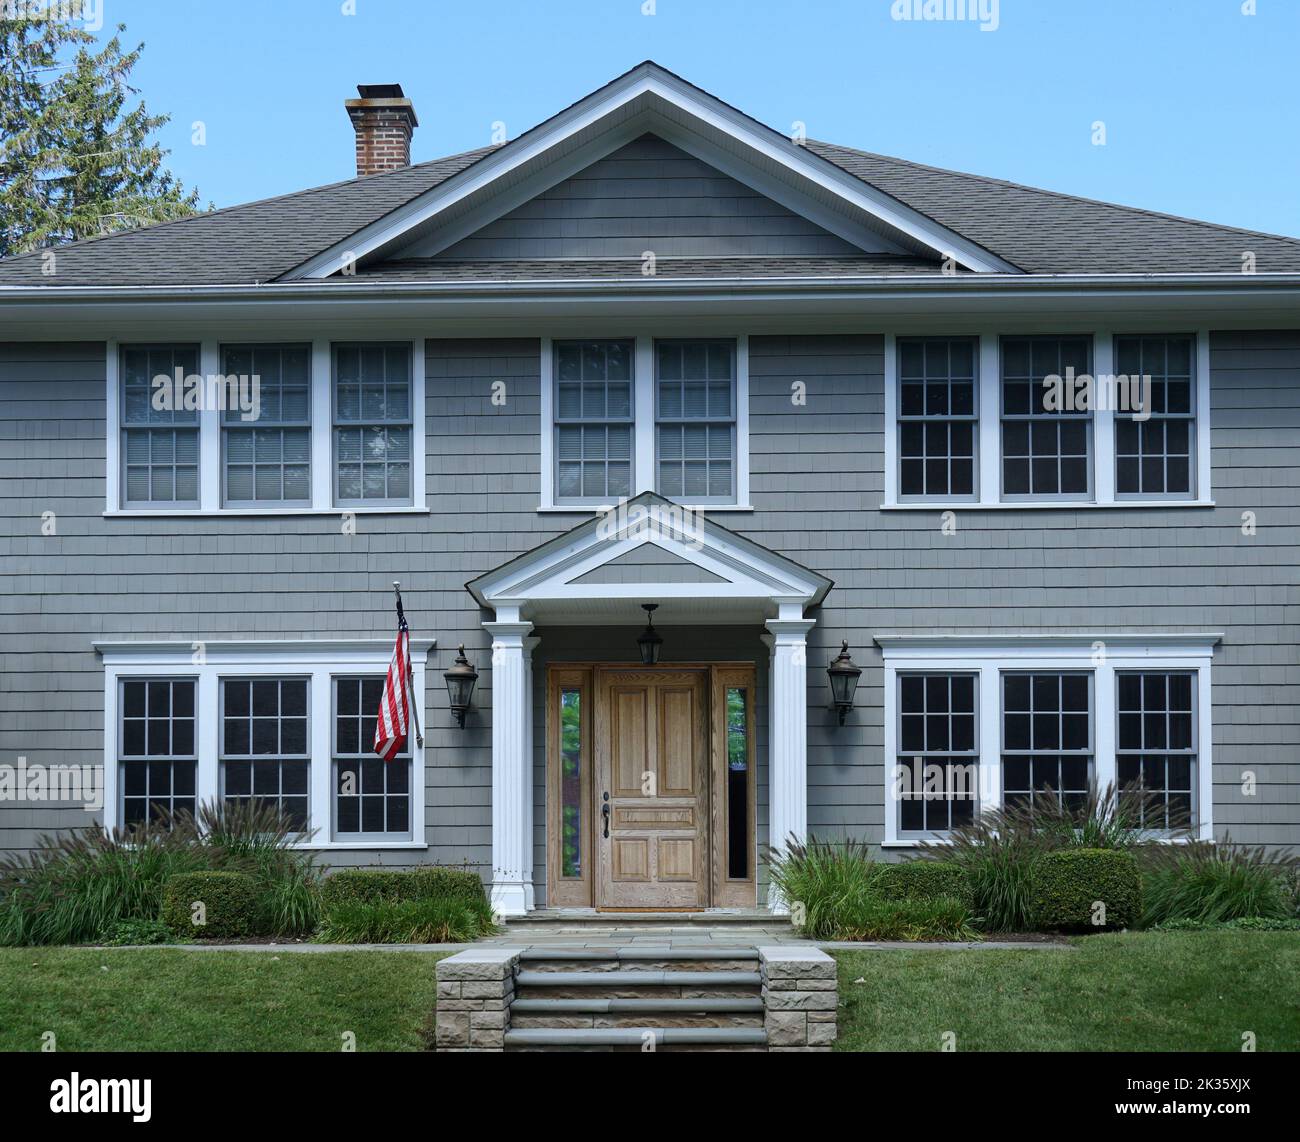 Front  of traditional two story suburban clapboard house with portico entrance Stock Photo